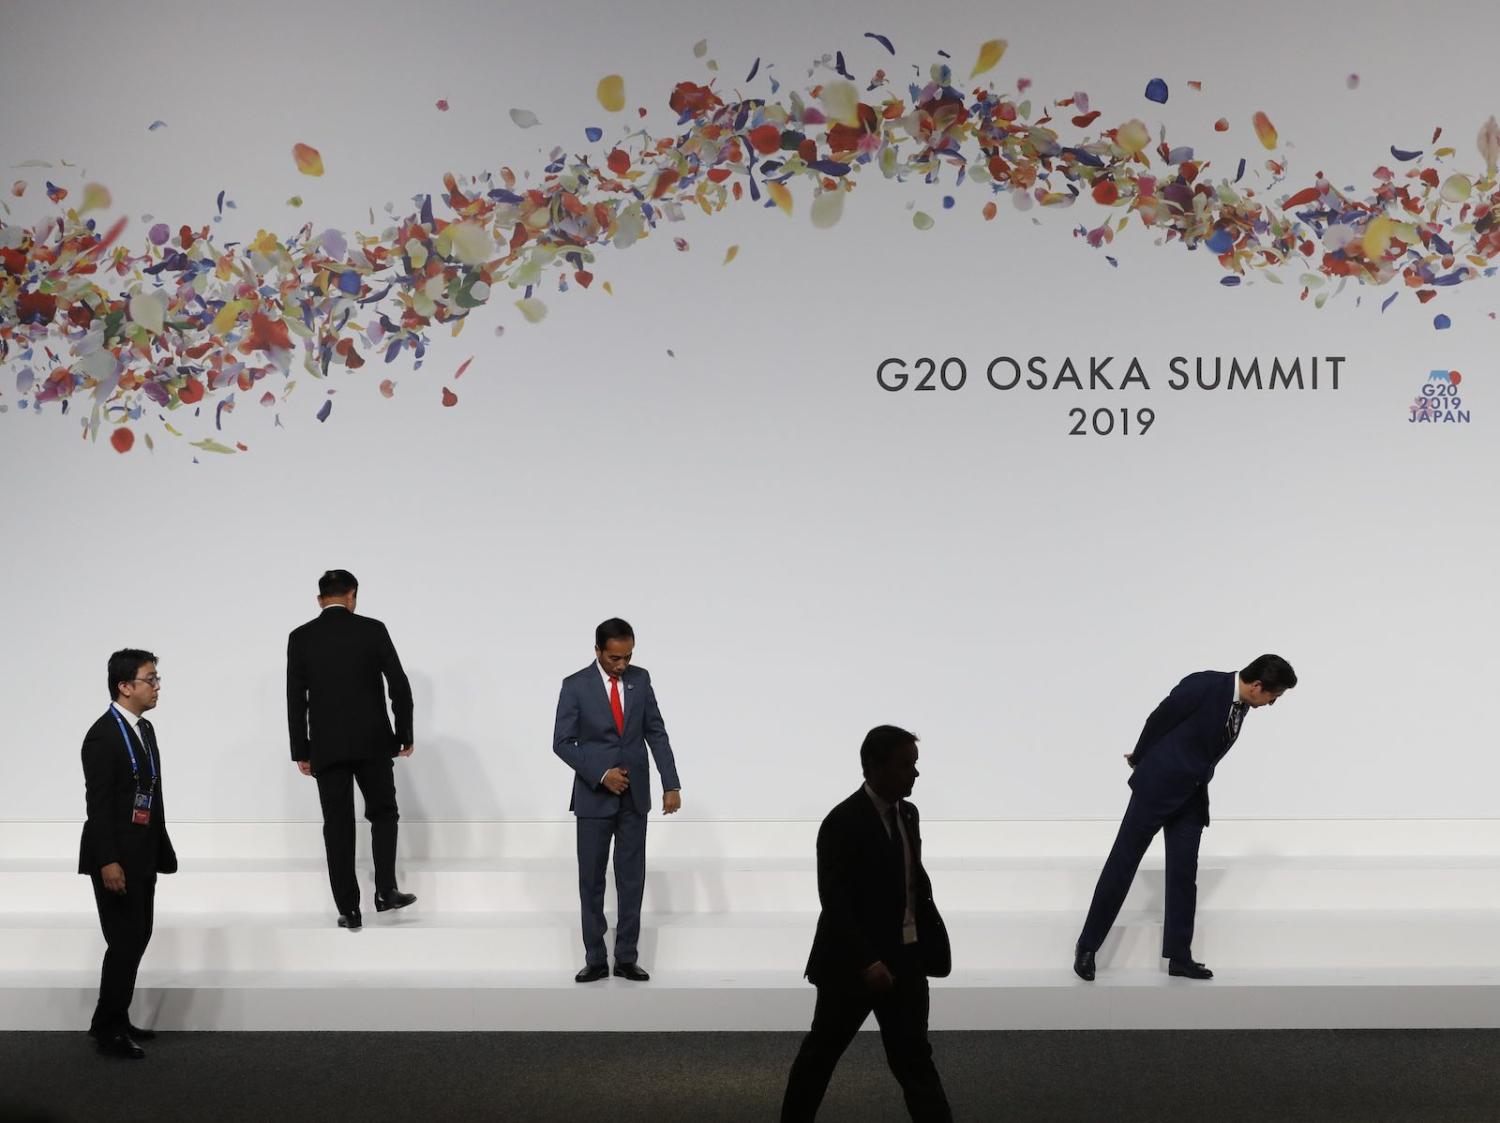 Indonesian President Joko Widodo and Japanese Prime Minister Shinzo Abe check their positions before a photo session at the G20 summit (Photo: Kim Kyung-Hoon via Getty)